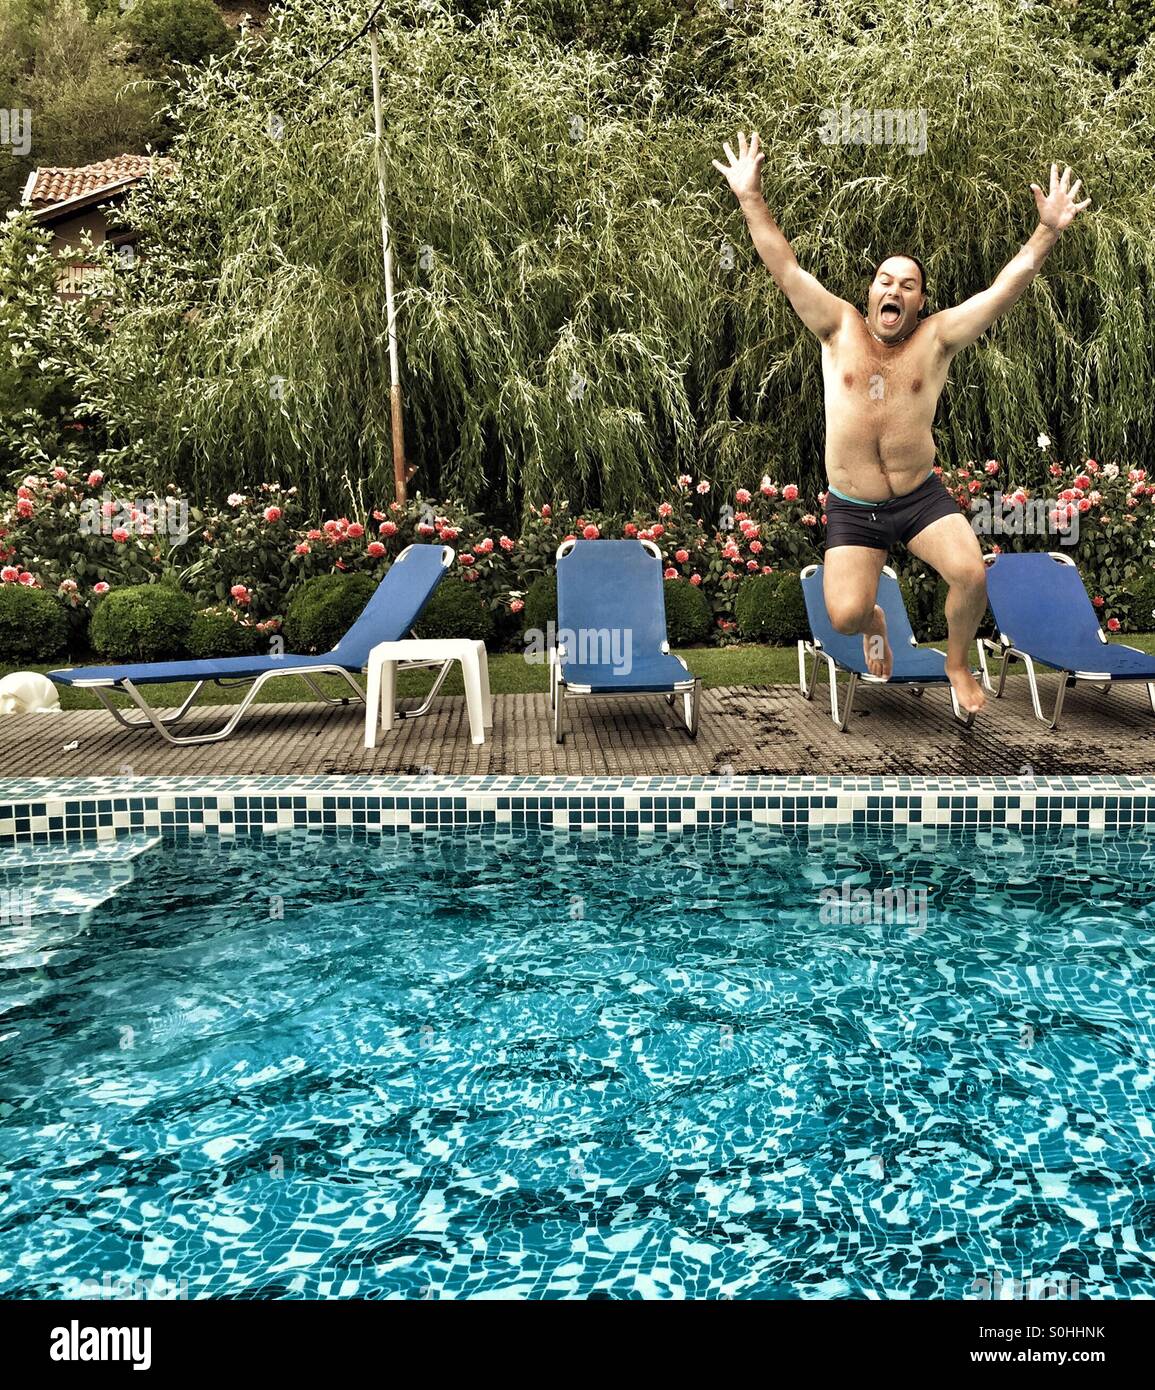 Man jumping into a swimming pool Stock Photo